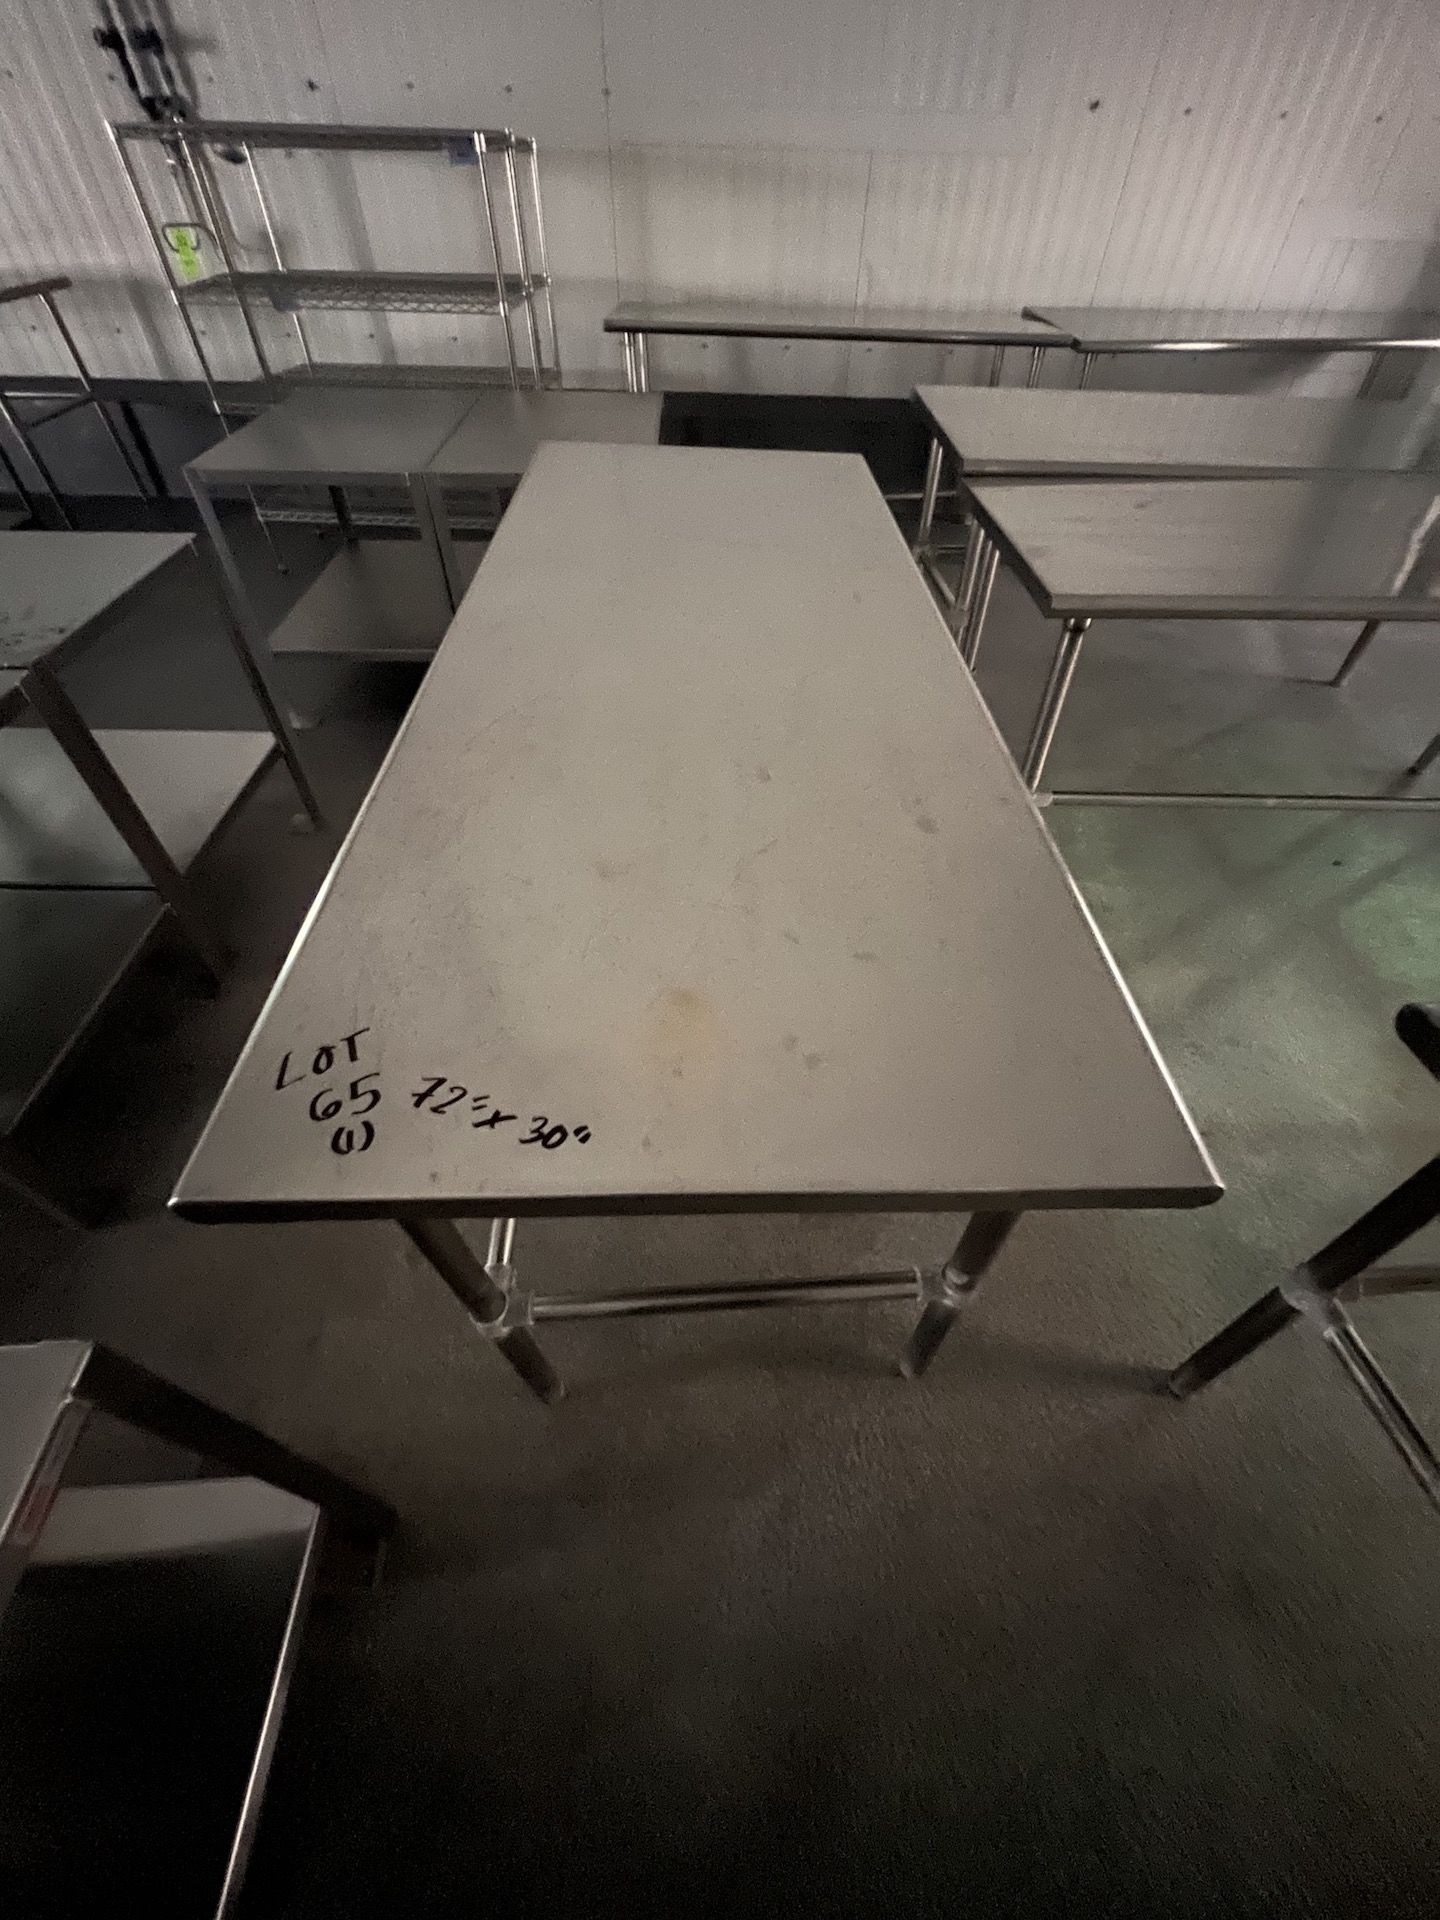 S/S TABLE, APPROX. DIMS: 72 IN X 30 IN (RIGGING & SIMPLE LOADING FEE $20.00) (NOTE: DOES NOT